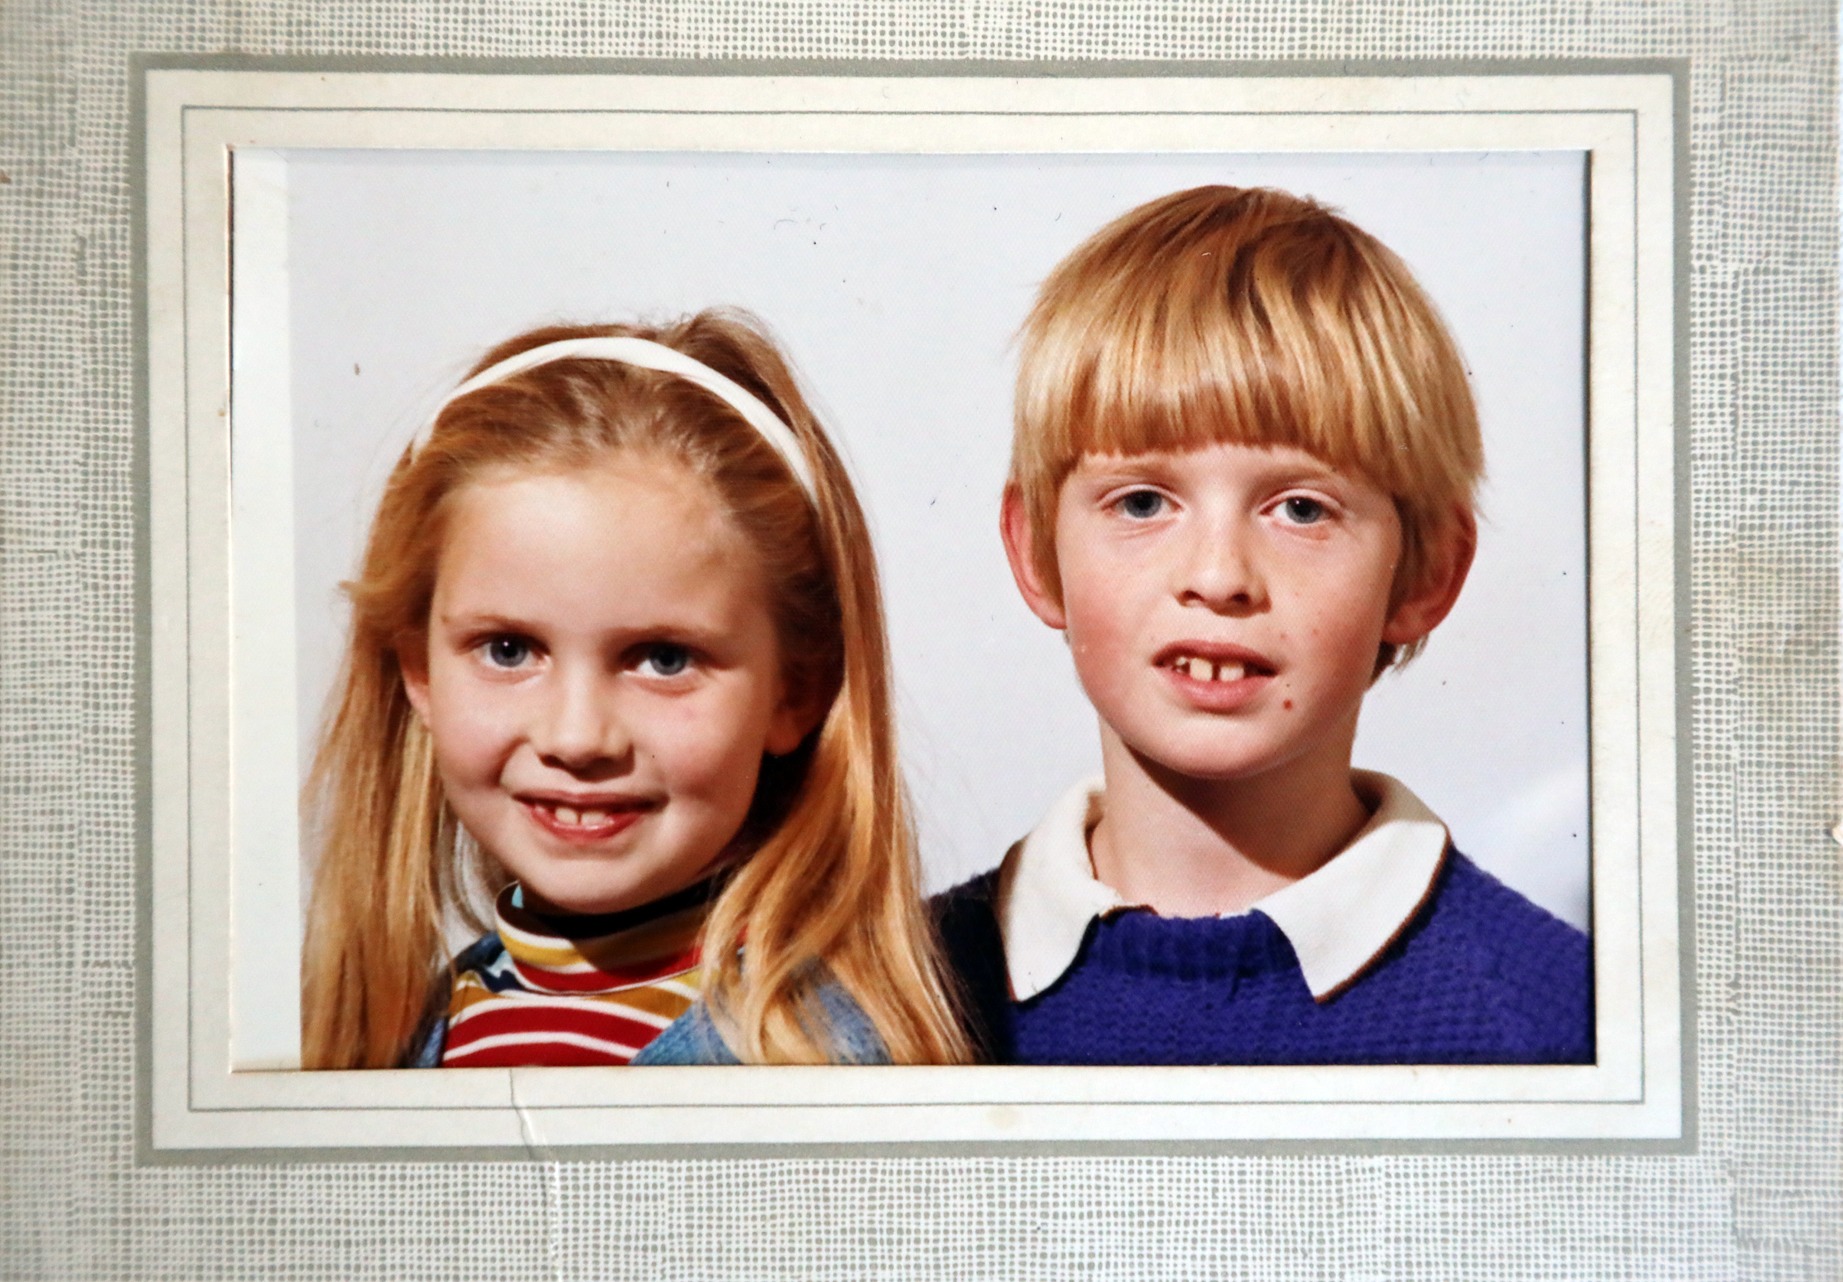 Alex pictured with her late brother Richard as children